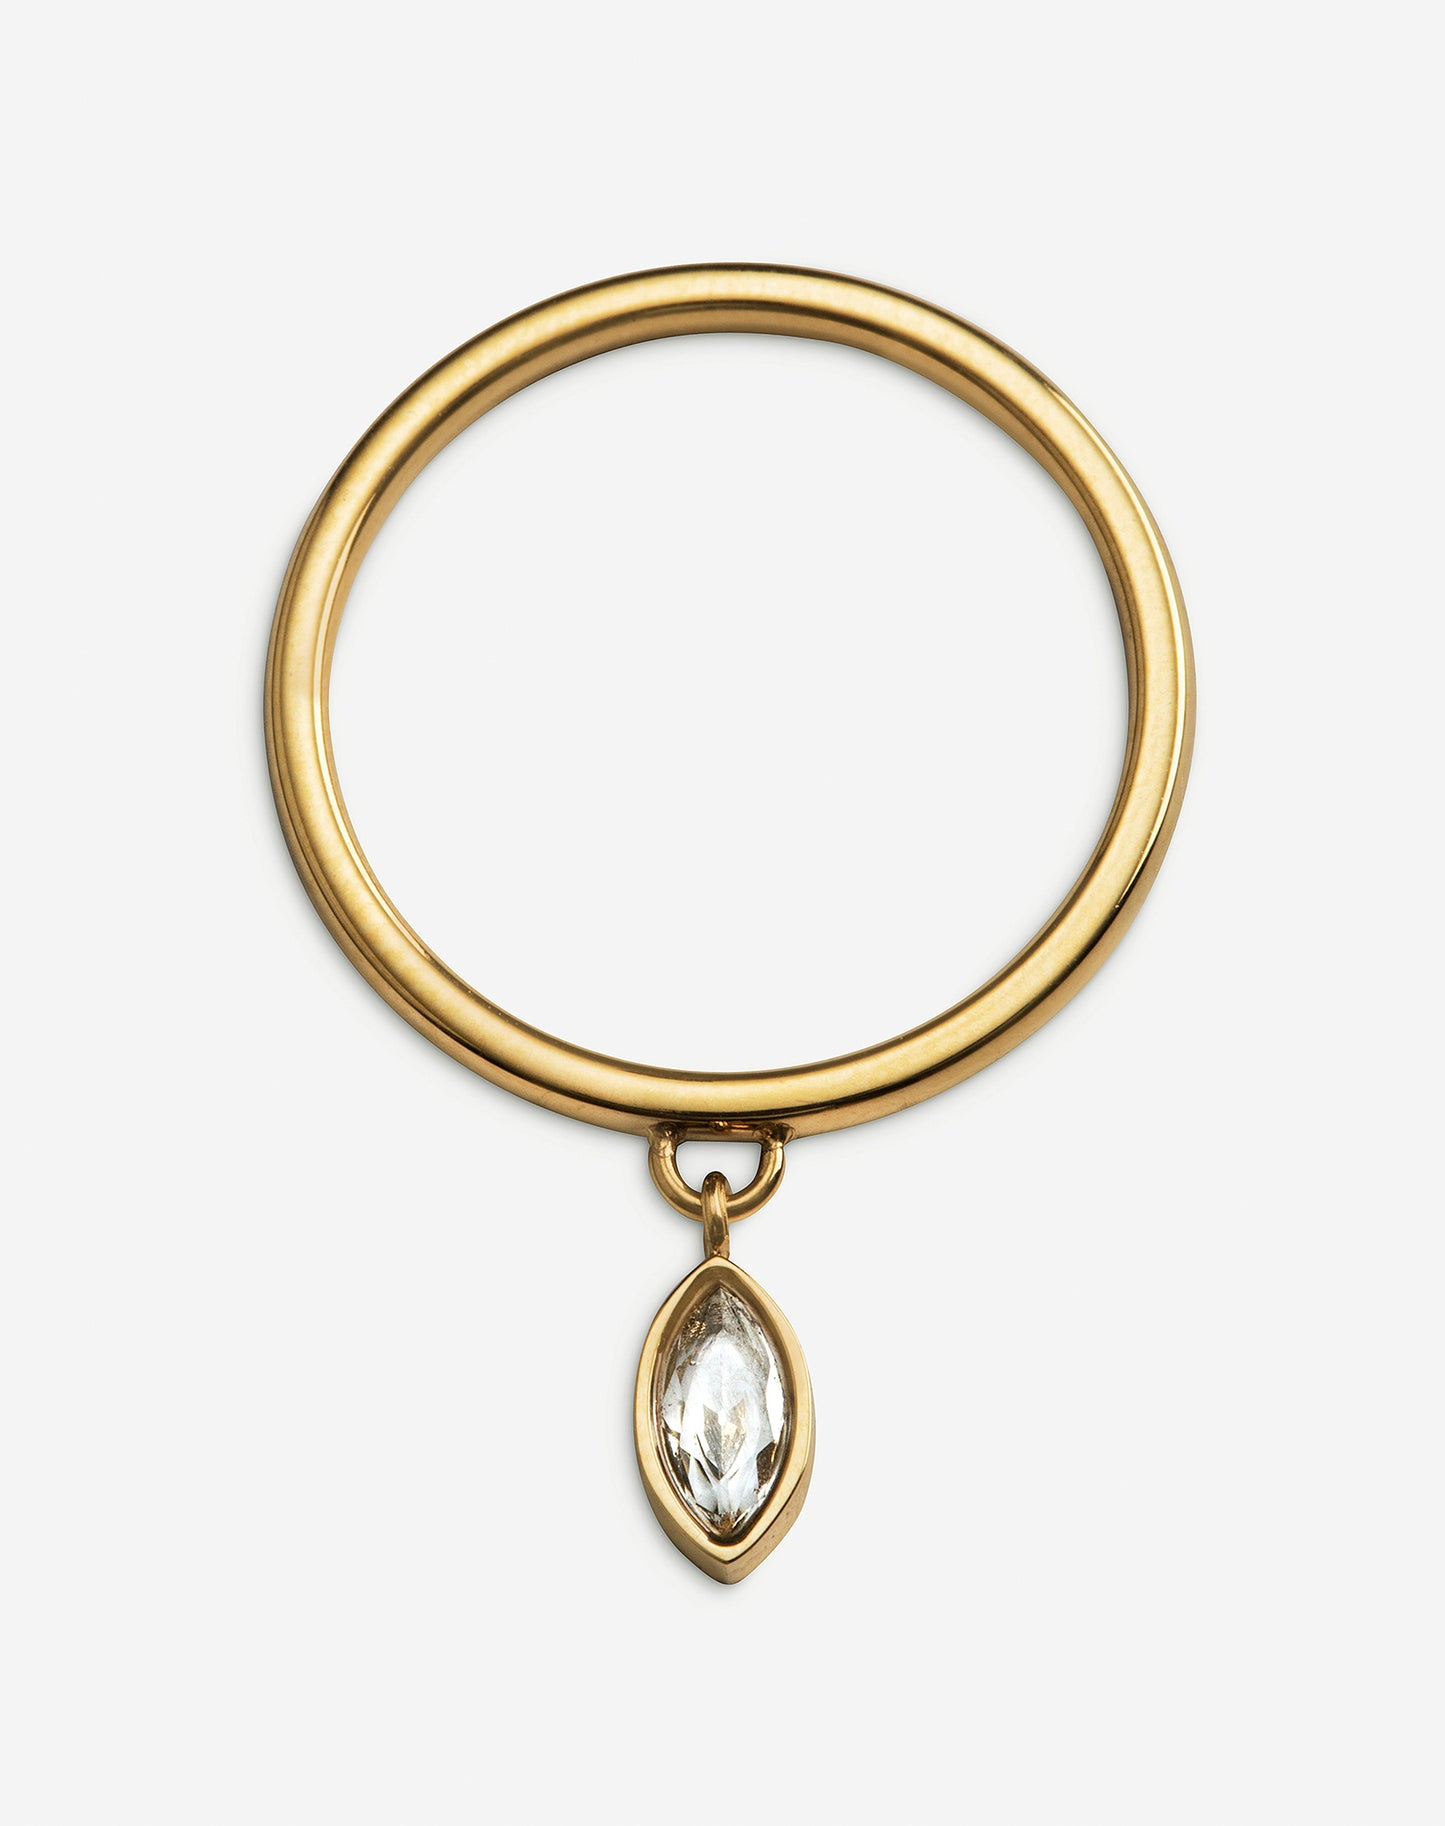 gold ring with crystal pendant for stacking